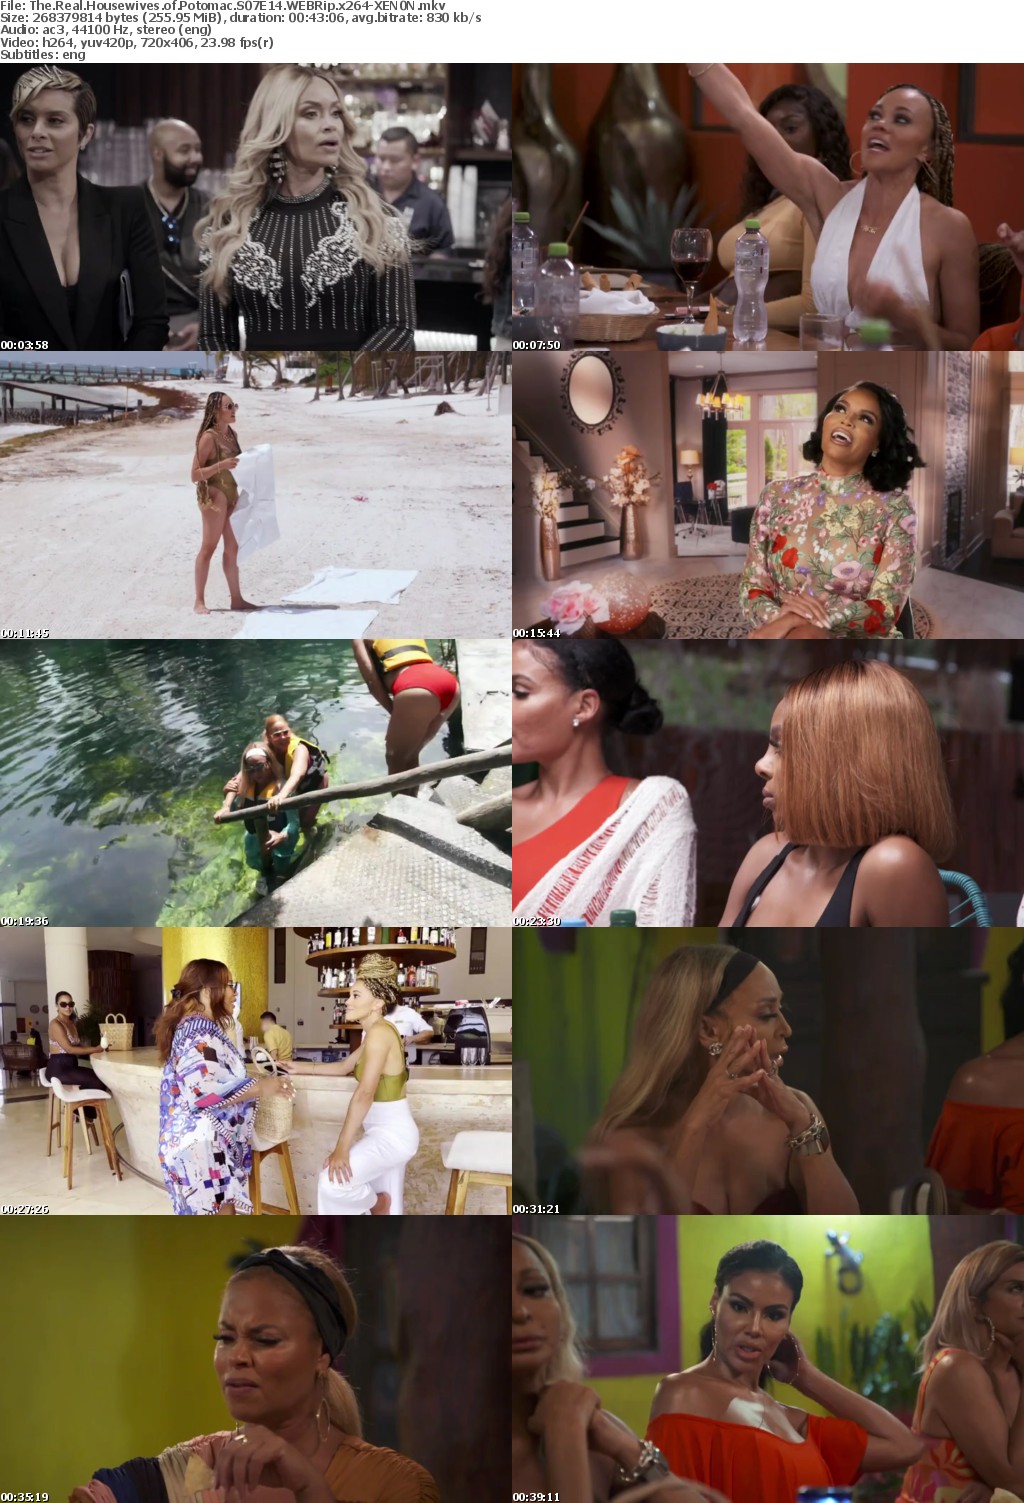 The Real Housewives of Potomac S07E14 WEBRip x264-XEN0N